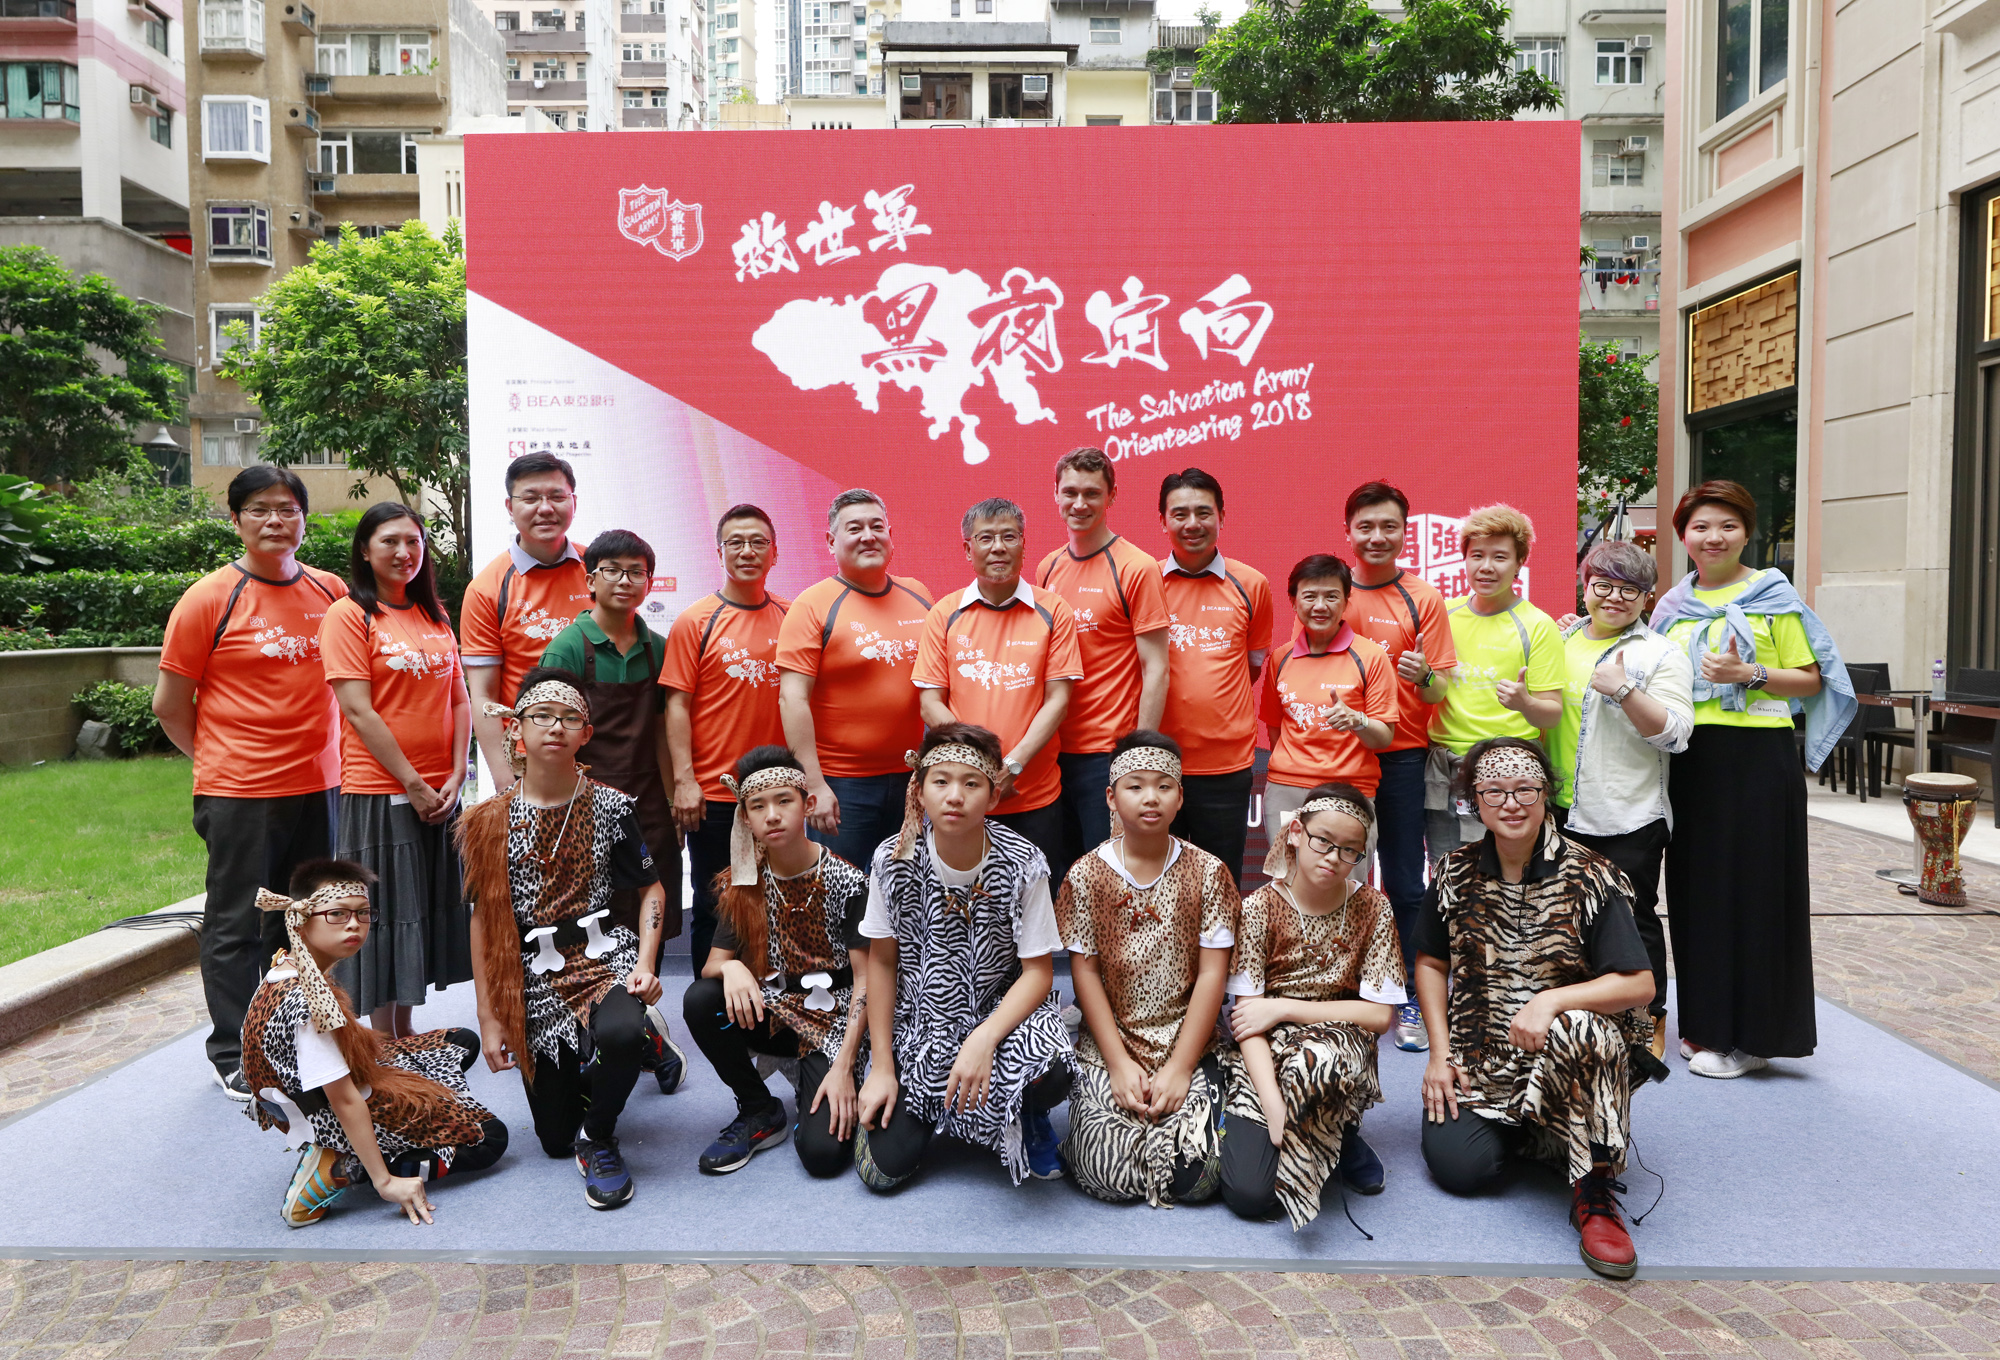 The Salvation Army Orienteering 2018 launching ceremony completes.